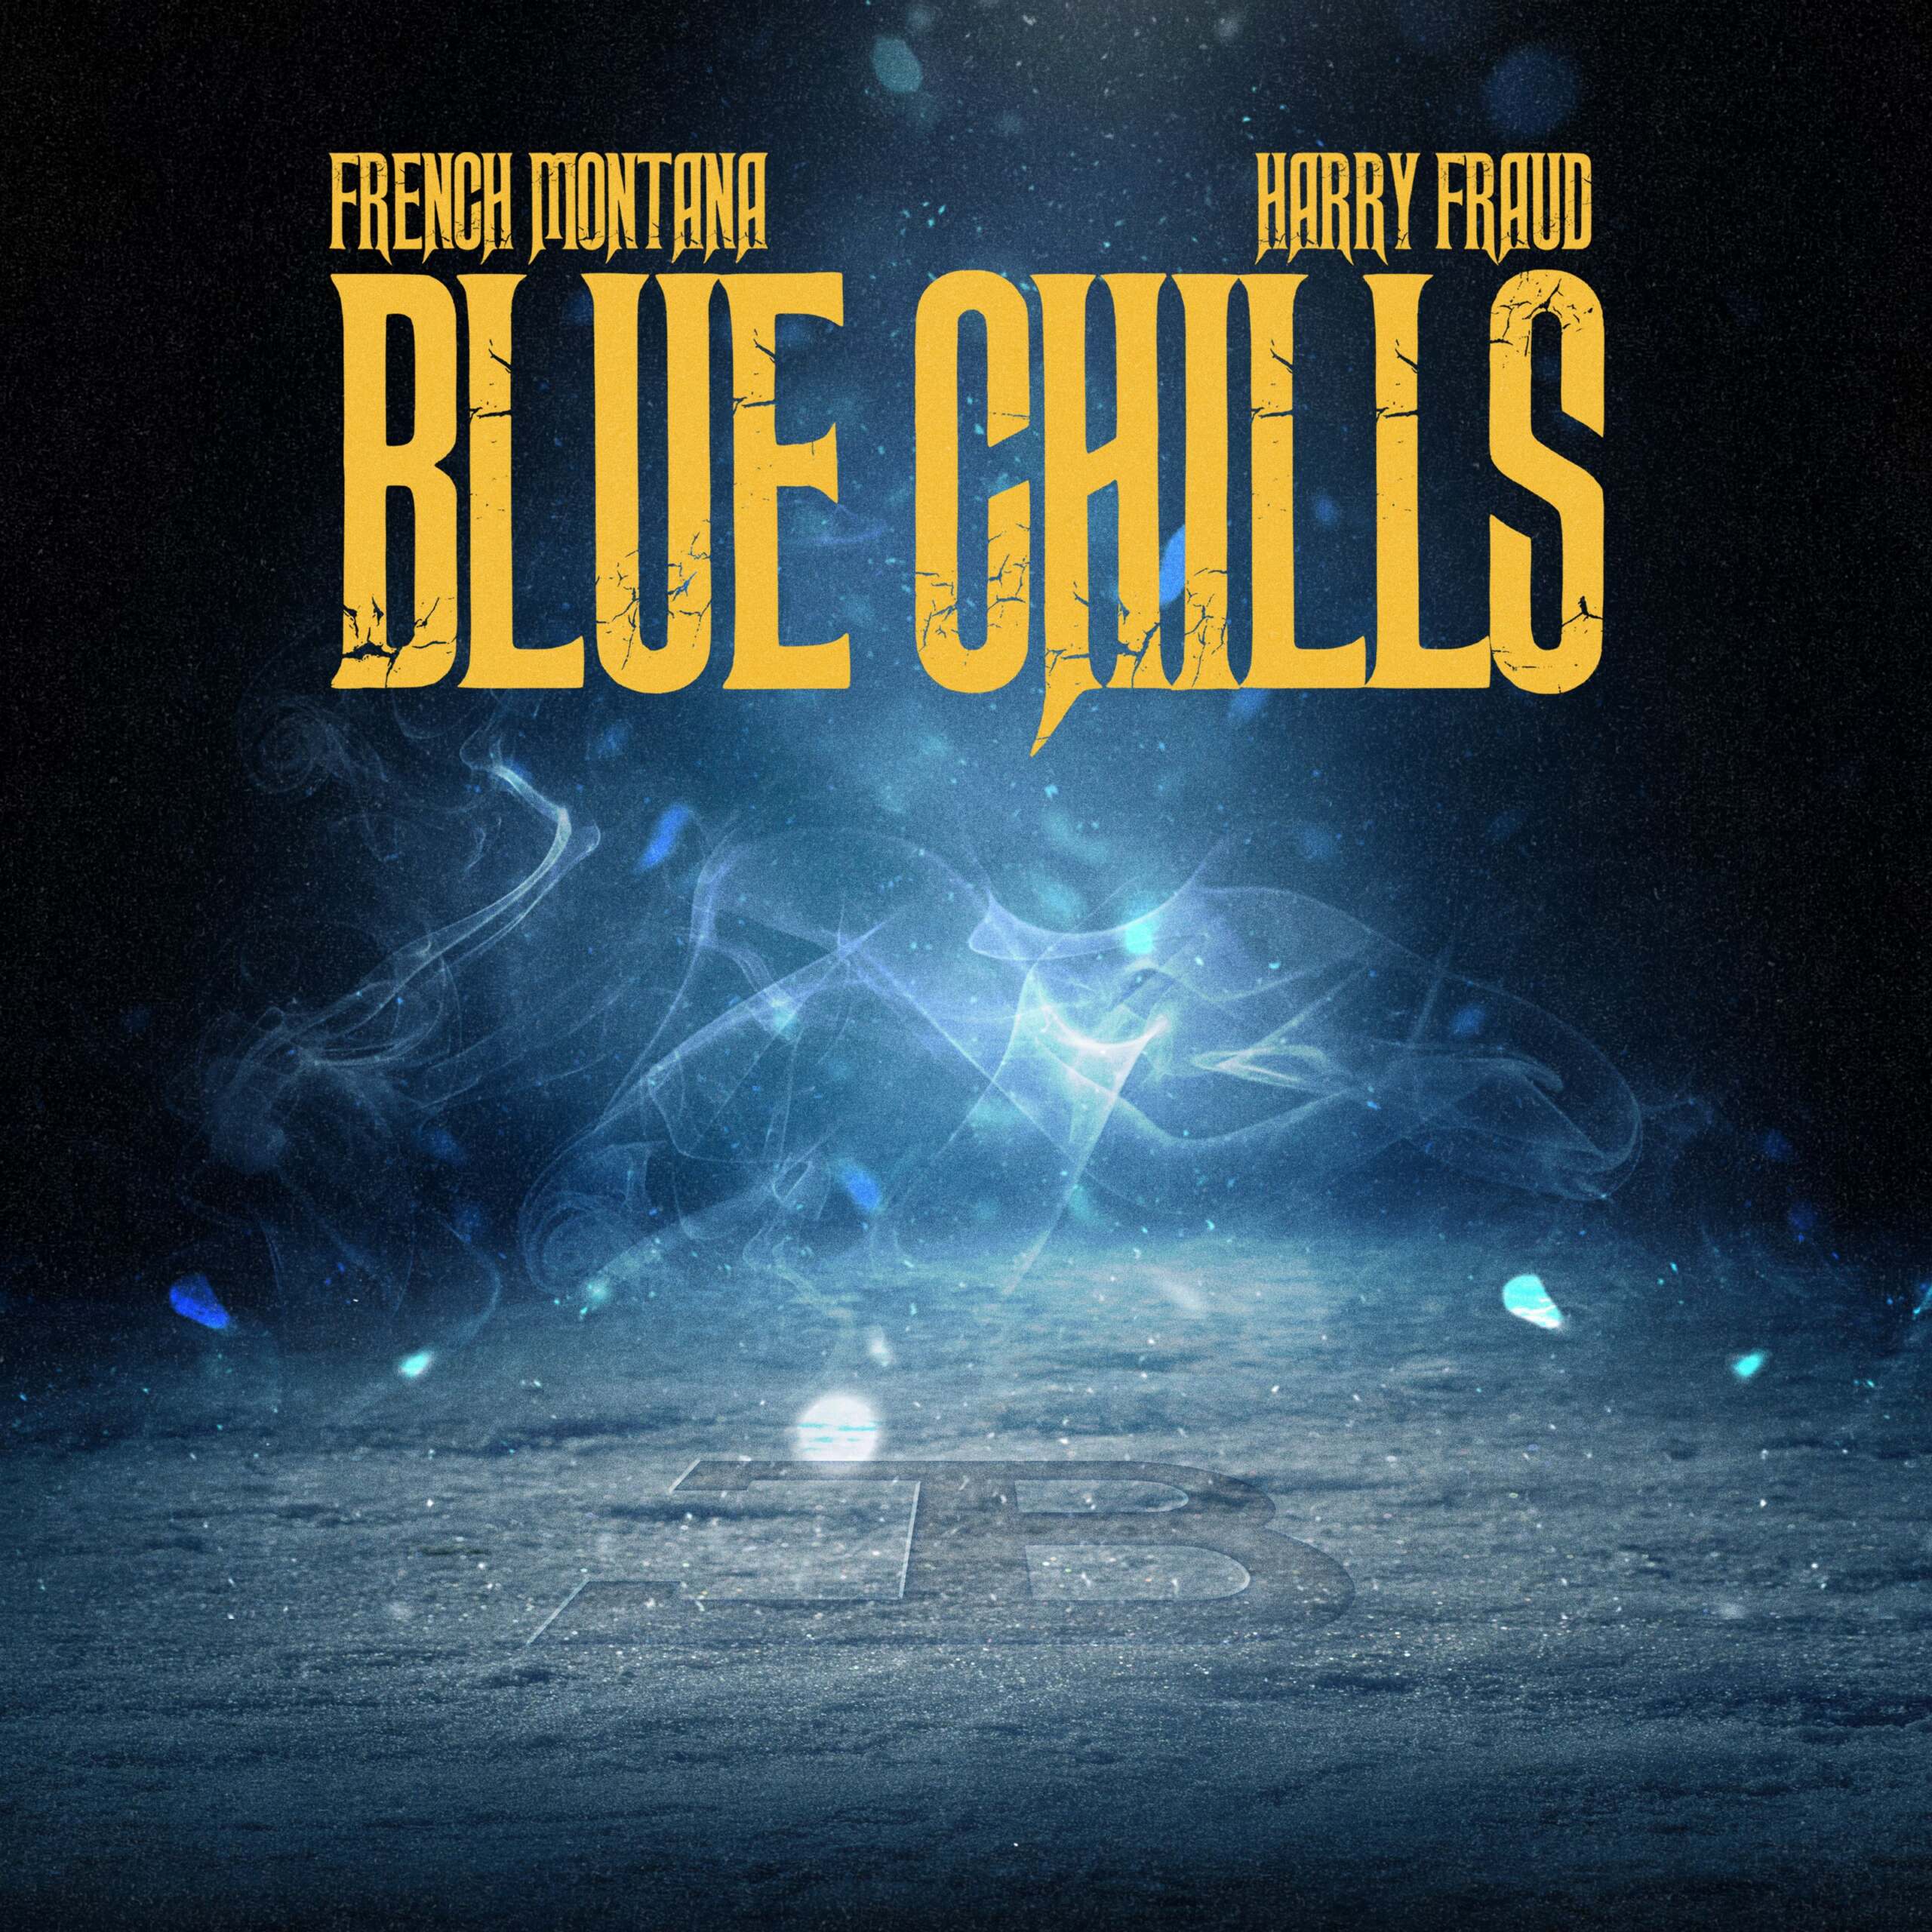 French Montana & Harry Fraud "Blue Chills" (Video)